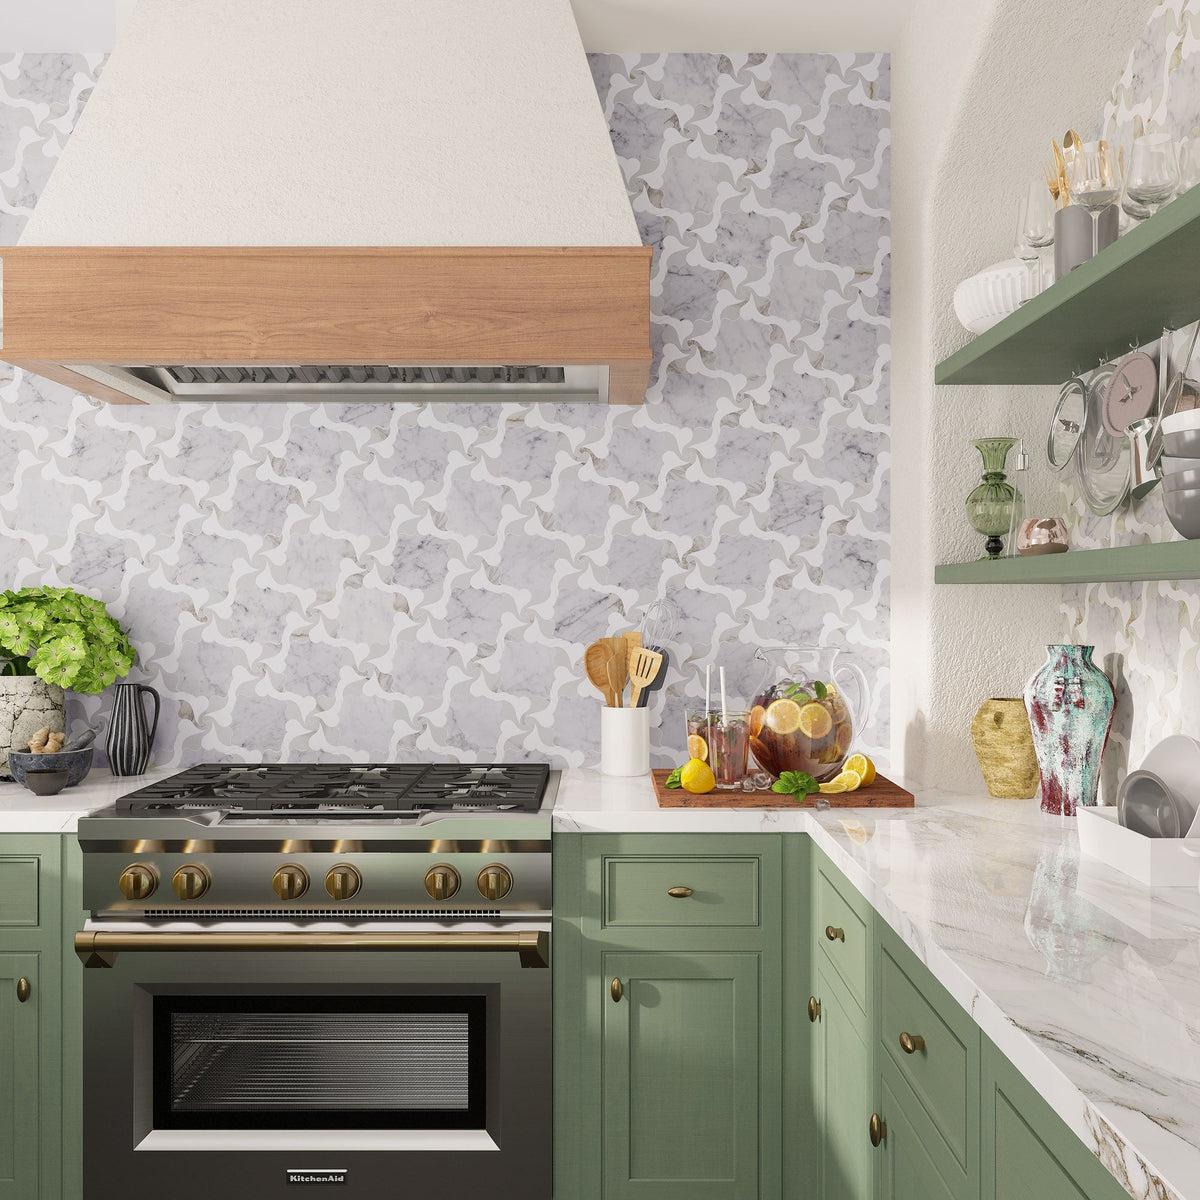 Green kitchen with white and gray marble tile backsplash